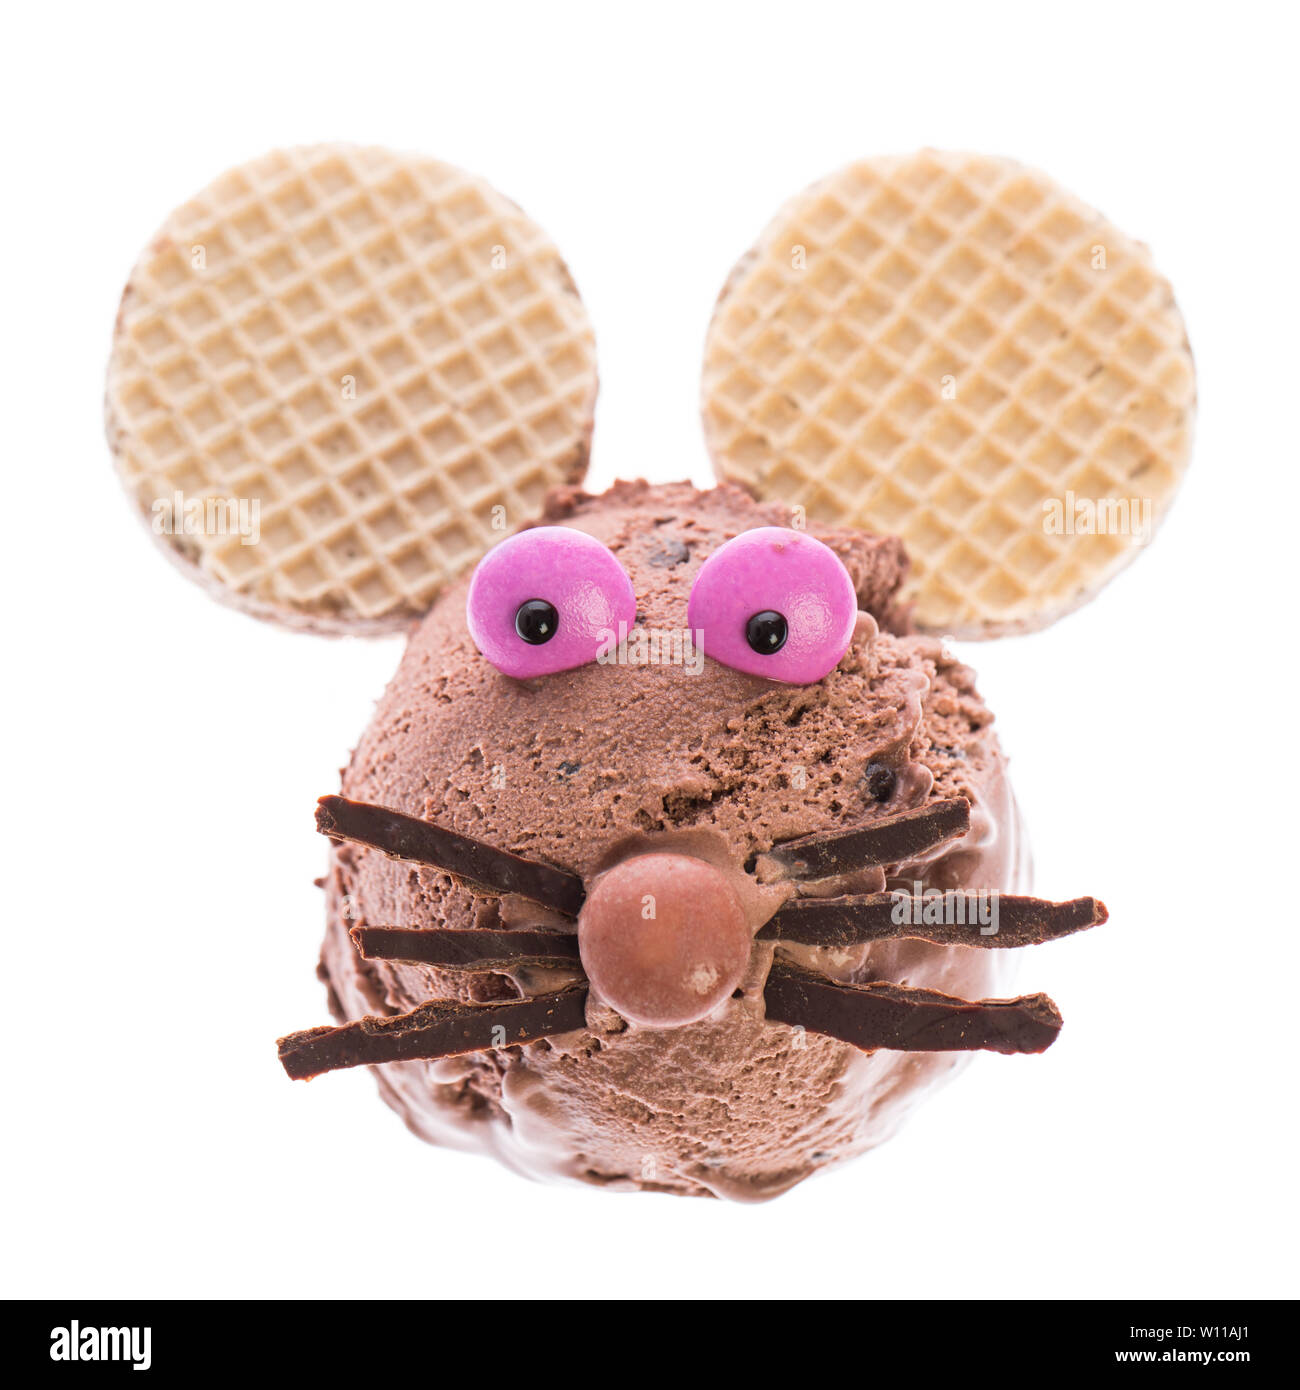 A mouse made out of ice cream. Real edible ice cream - no artificial ingredients used Stock Photo